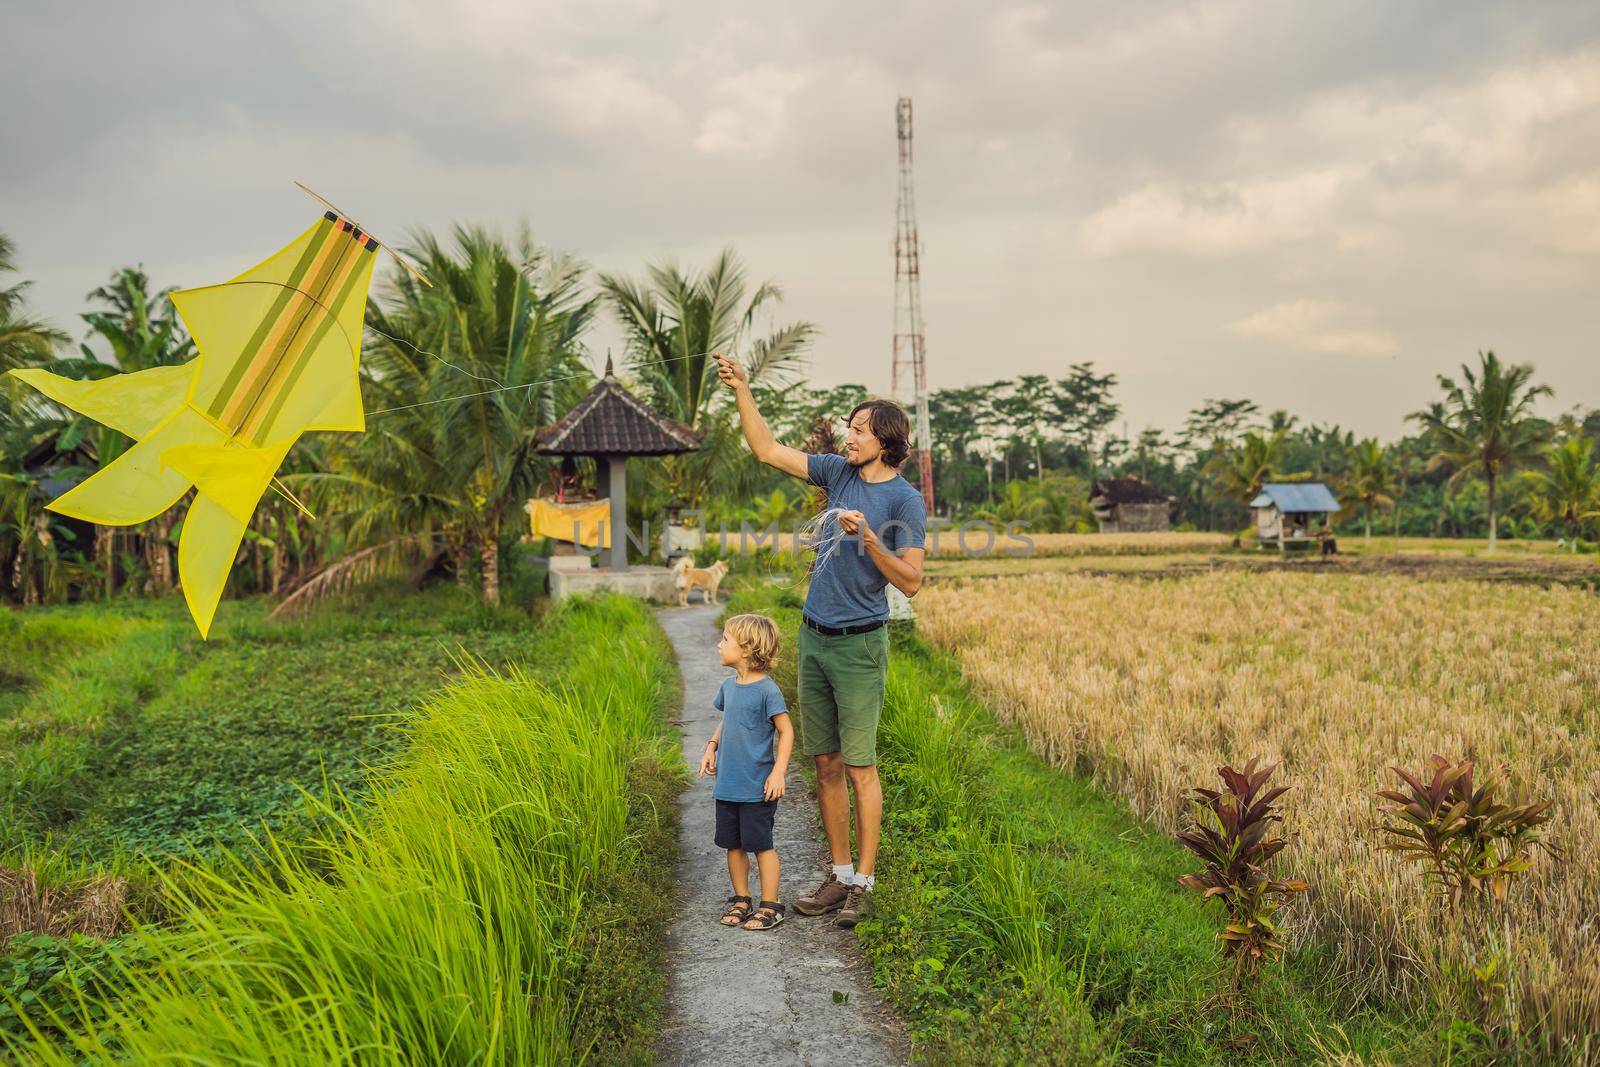 Dad and son launch a kite in a rice field in Ubud, Bali Island, Indonesia by galitskaya